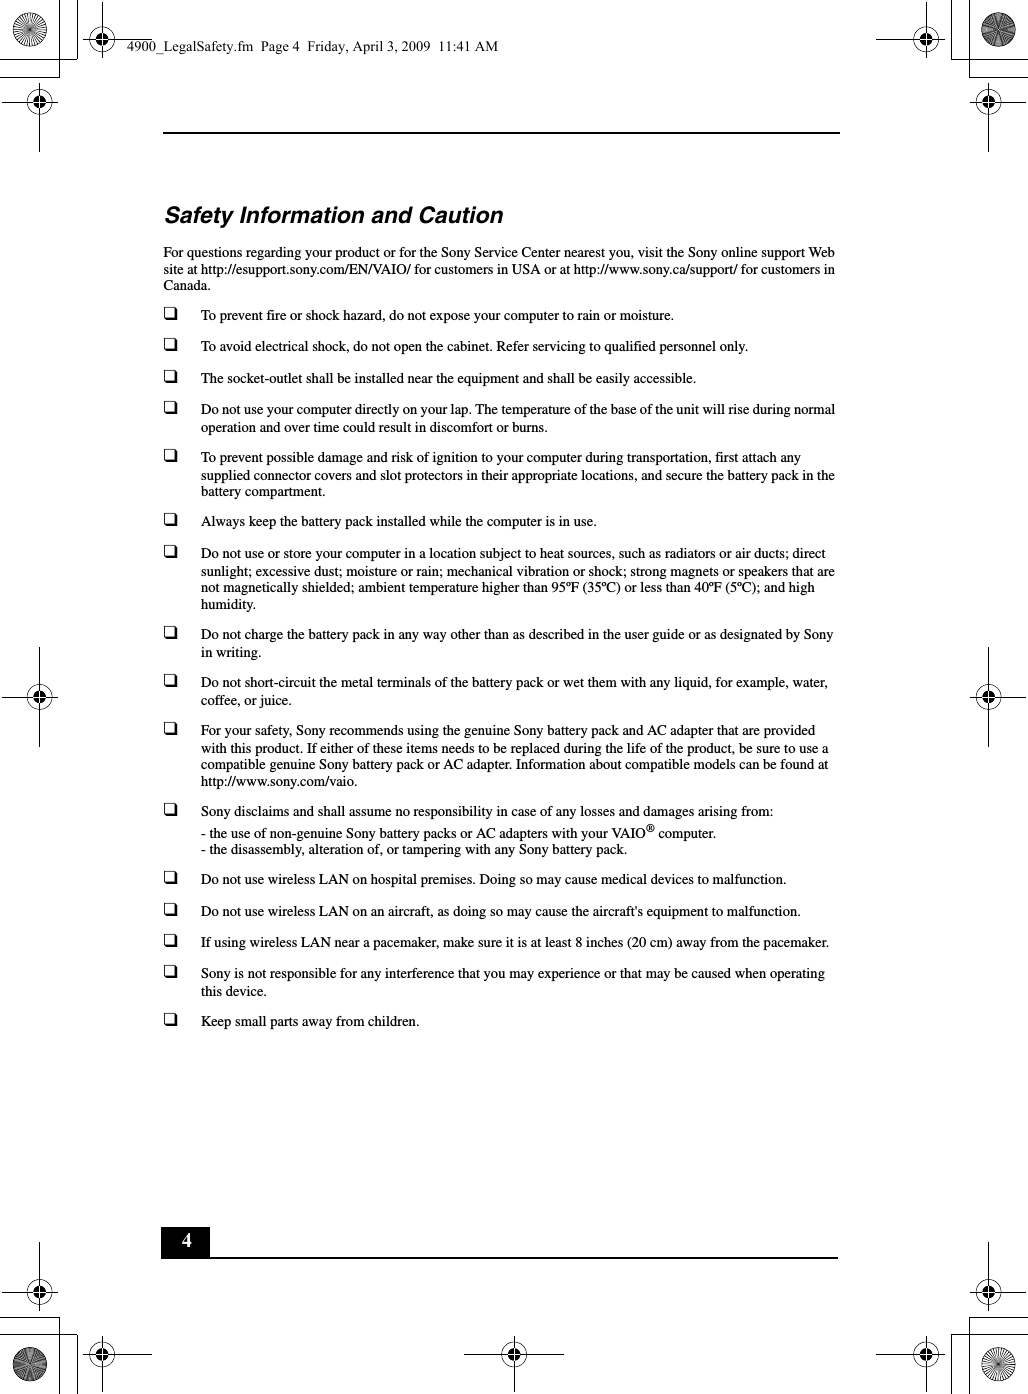 4Safety Information and CautionFor questions regarding your product or for the Sony Service Center nearest you, visit the Sony online support Web site at http://esupport.sony.com/EN/VAIO/ for customers in USA or at http://www.sony.ca/support/ for customers in Canada.❑To prevent fire or shock hazard, do not expose your computer to rain or moisture.❑To avoid electrical shock, do not open the cabinet. Refer servicing to qualified personnel only.❑The socket-outlet shall be installed near the equipment and shall be easily accessible.❑Do not use your computer directly on your lap. The temperature of the base of the unit will rise during normal operation and over time could result in discomfort or burns.❑To prevent possible damage and risk of ignition to your computer during transportation, first attach any supplied connector covers and slot protectors in their appropriate locations, and secure the battery pack in the battery compartment.❑Always keep the battery pack installed while the computer is in use.❑Do not use or store your computer in a location subject to heat sources, such as radiators or air ducts; direct sunlight; excessive dust; moisture or rain; mechanical vibration or shock; strong magnets or speakers that are not magnetically shielded; ambient temperature higher than 95ºF (35ºC) or less than 40ºF (5ºC); and high humidity.❑Do not charge the battery pack in any way other than as described in the user guide or as designated by Sony in writing.❑Do not short-circuit the metal terminals of the battery pack or wet them with any liquid, for example, water, coffee, or juice.❑For your safety, Sony recommends using the genuine Sony battery pack and AC adapter that are provided with this product. If either of these items needs to be replaced during the life of the product, be sure to use a compatible genuine Sony battery pack or AC adapter. Information about compatible models can be found at http://www.sony.com/vaio.❑Sony disclaims and shall assume no responsibility in case of any losses and damages arising from:- the use of non-genuine Sony battery packs or AC adapters with your VAIO® computer.- the disassembly, alteration of, or tampering with any Sony battery pack.❑Do not use wireless LAN on hospital premises. Doing so may cause medical devices to malfunction.❑Do not use wireless LAN on an aircraft, as doing so may cause the aircraft&apos;s equipment to malfunction.❑If using wireless LAN near a pacemaker, make sure it is at least 8 inches (20 cm) away from the pacemaker.❑Sony is not responsible for any interference that you may experience or that may be caused when operating this device.❑Keep small parts away from children.4900_LegalSafety.fm  Page 4  Friday, April 3, 2009  11:41 AM